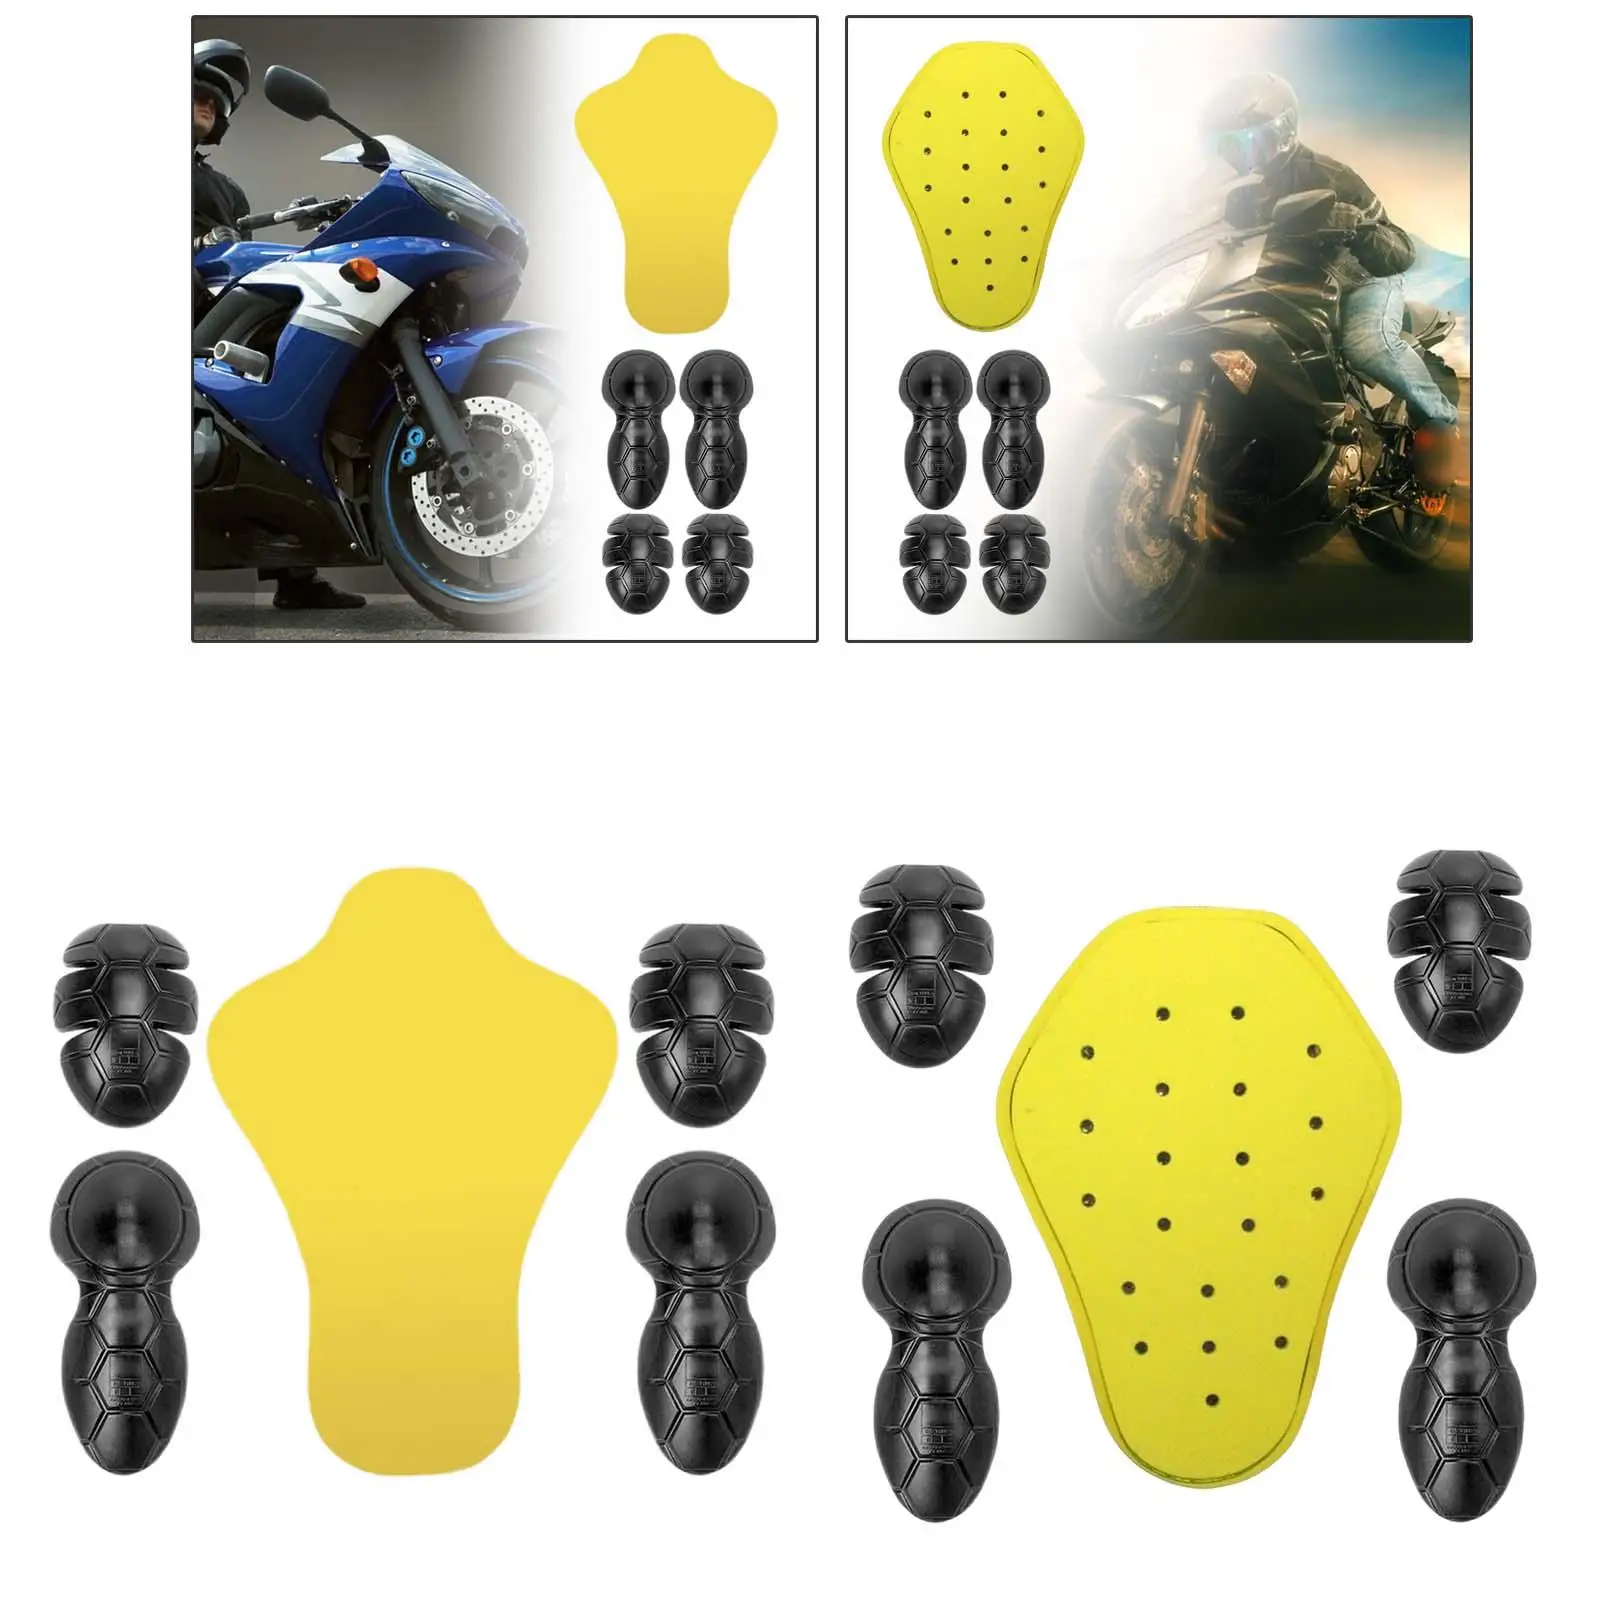 5 Pieces Removable Motorcycle Armour Set Elbow Knee Back Pad Clothing Protector for Riding Outdoor Cycling for Men Women